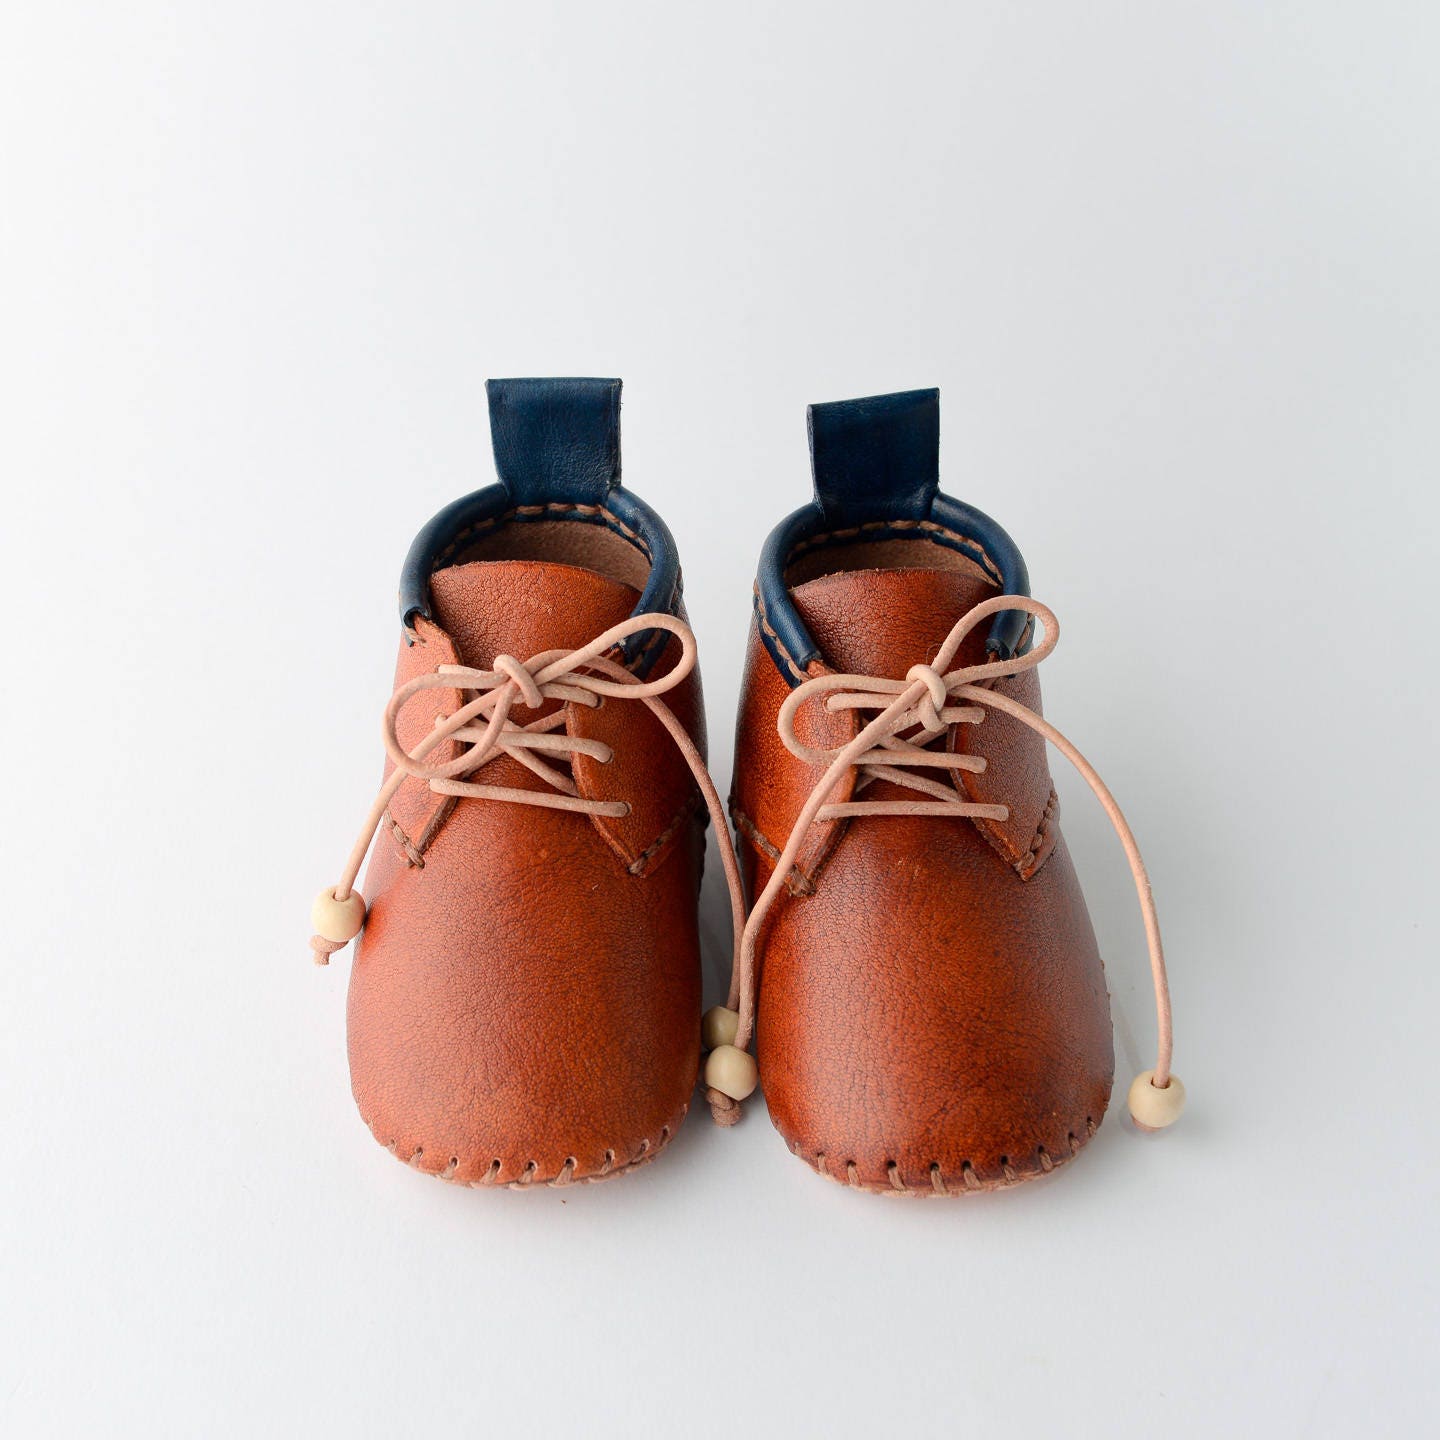 Handmade Unique Leather Baby Shoes